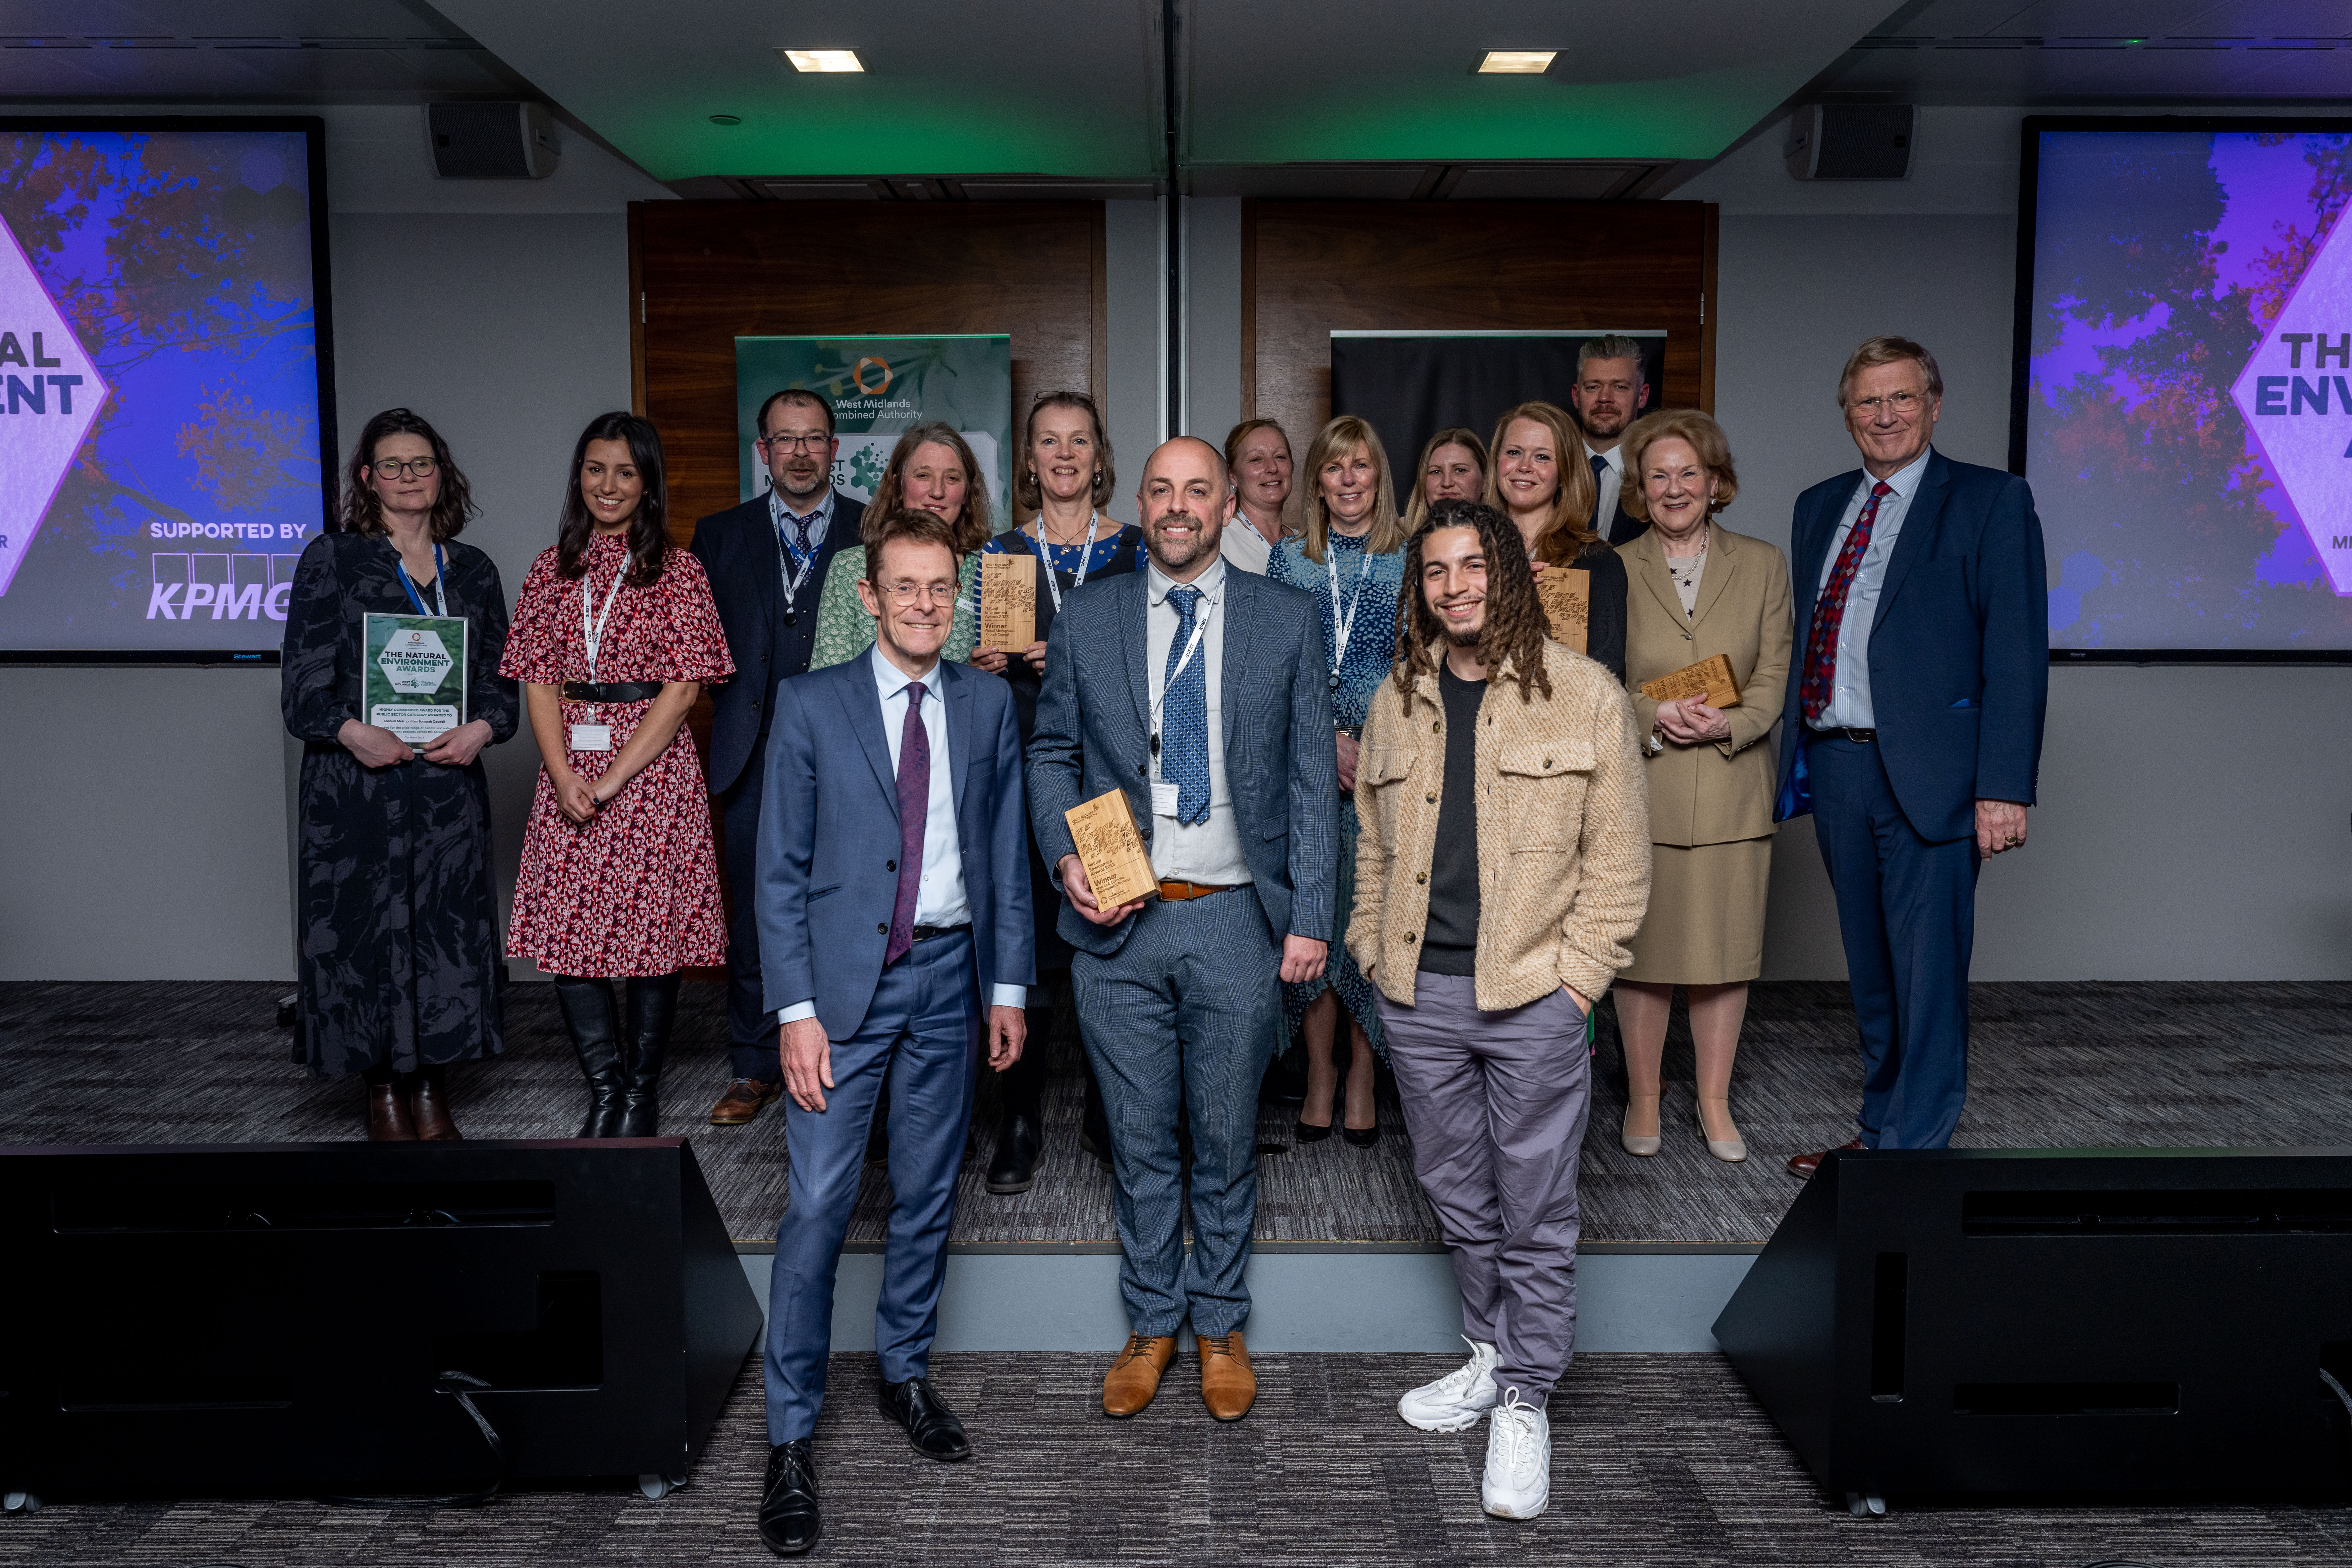 The Mayor of the West Midlands and the winners of the 2023 West Midlands Natural Environment Awards smiling at the camera holding their trophies.